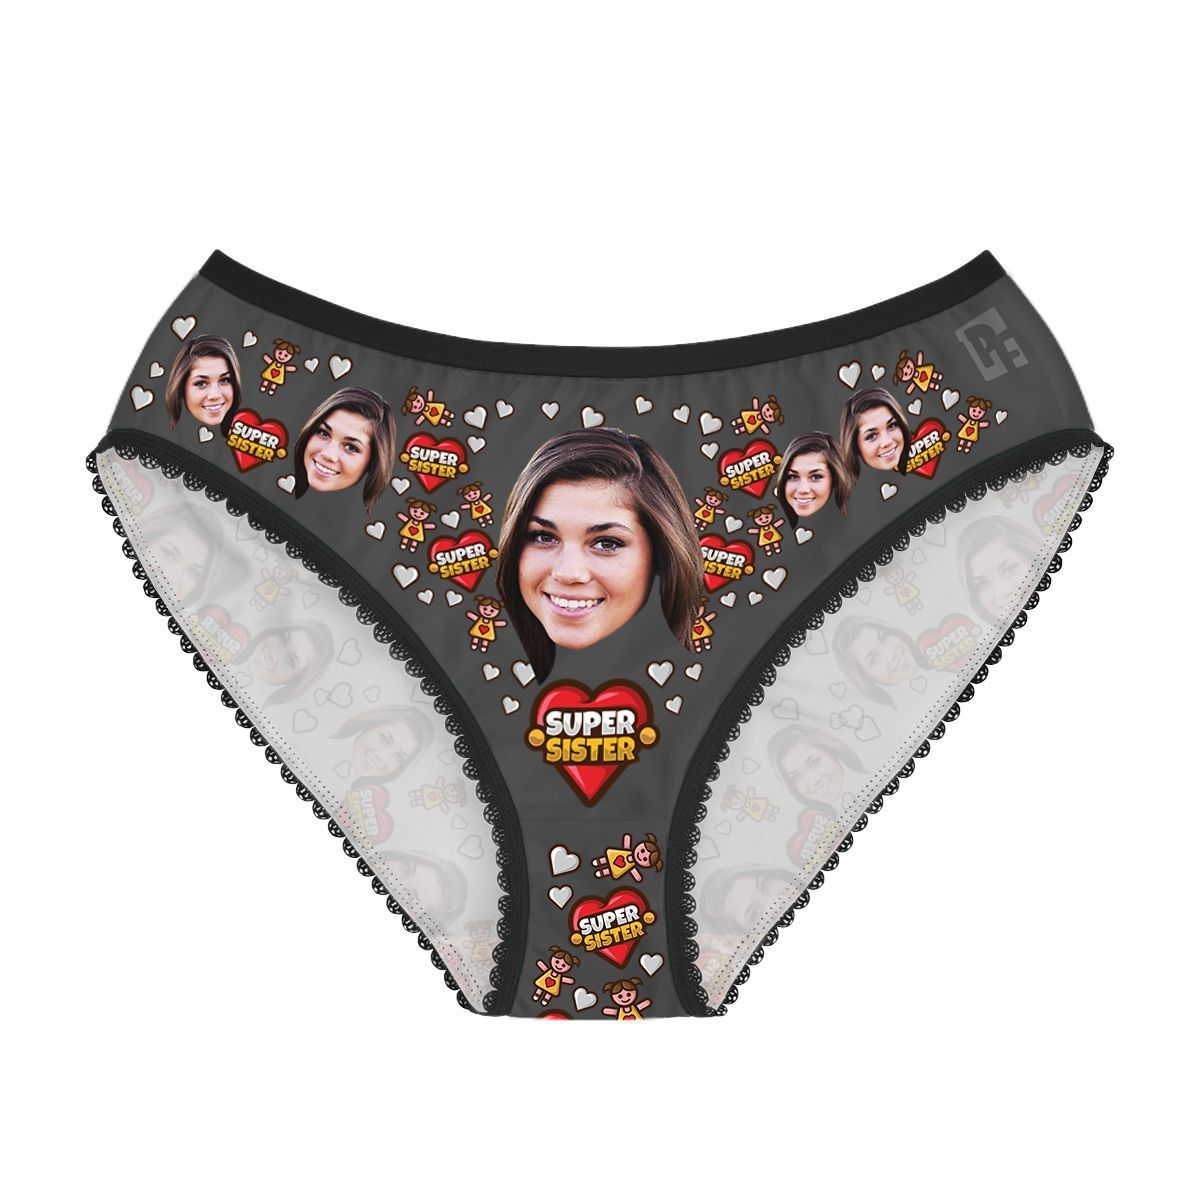 Mint Super Sister women's underwear briefs personalized with photo printed on them